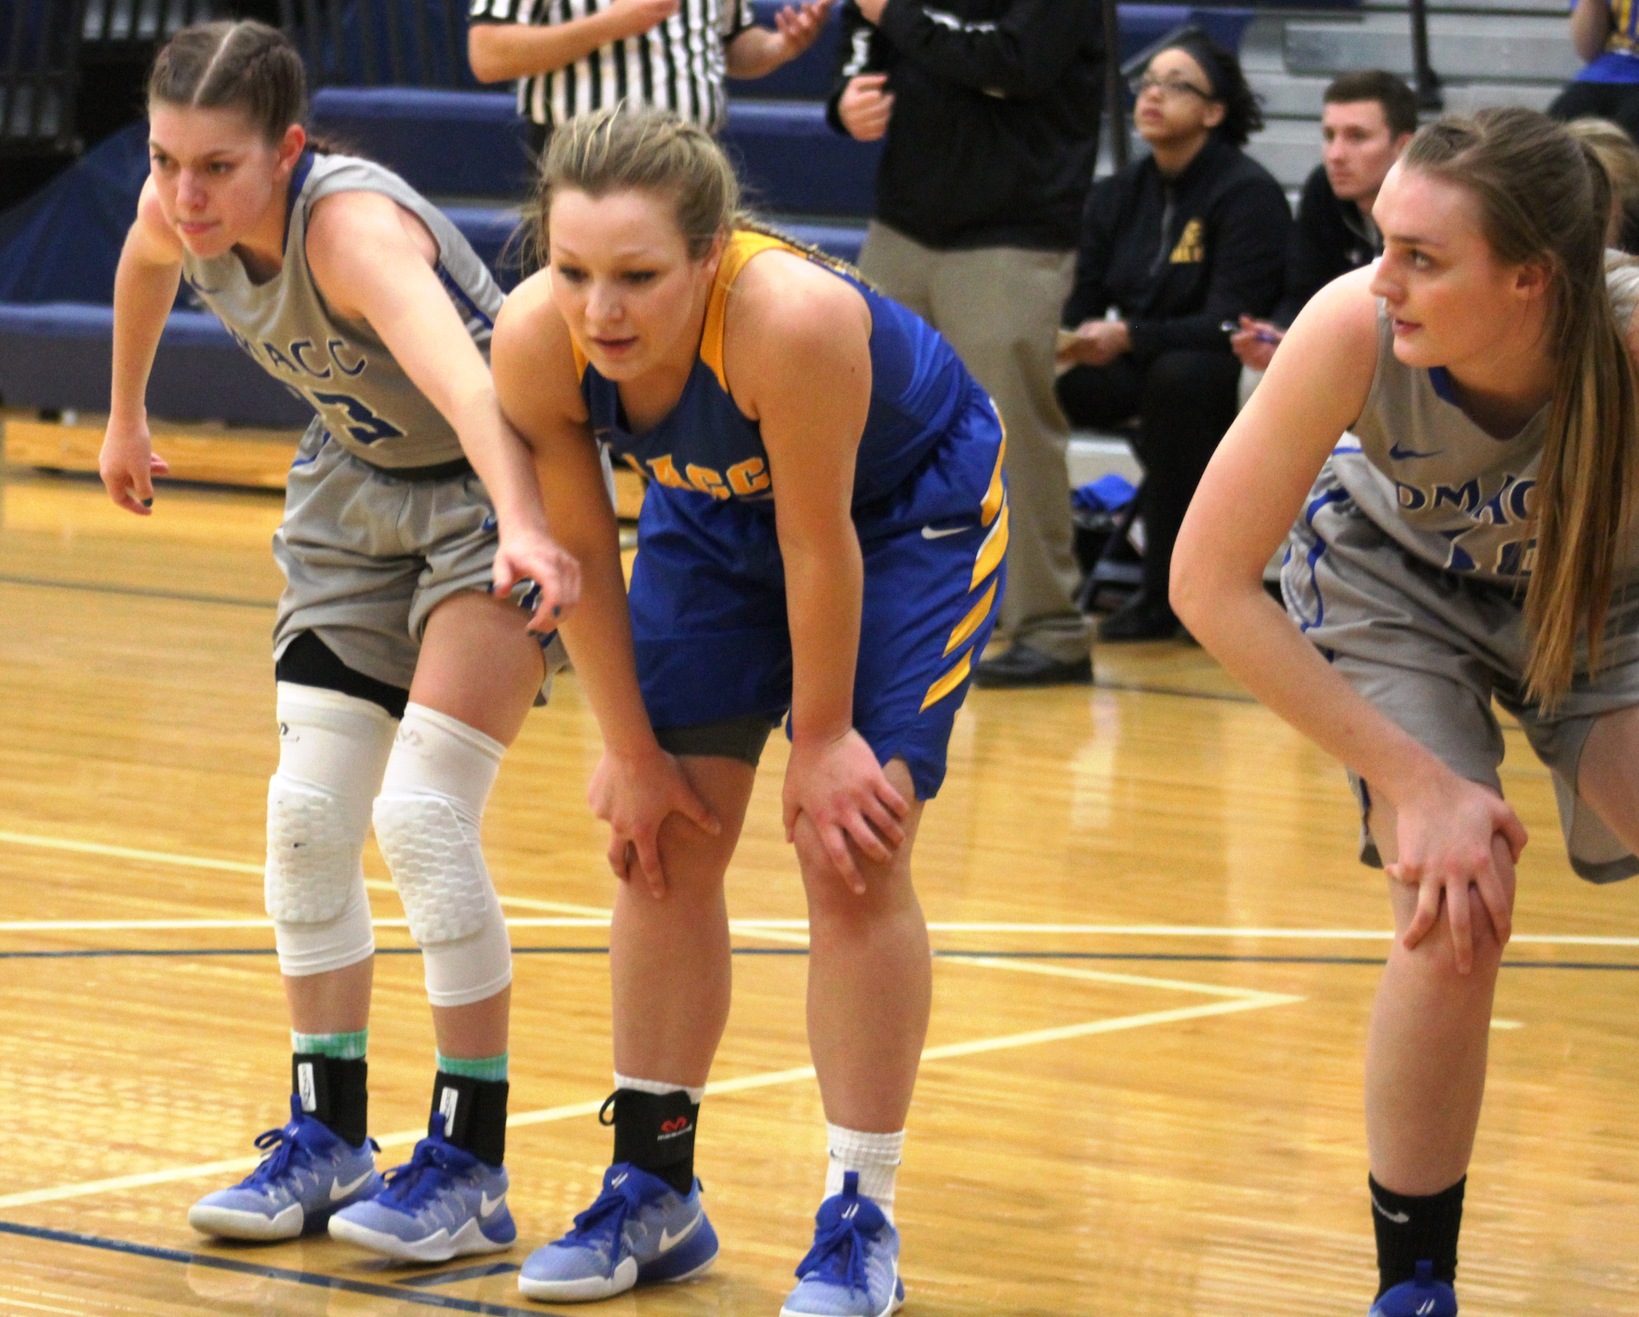 NIACC's Hattie Davidson gets ready to battle for a rebound off a free throw in Thursday's game.